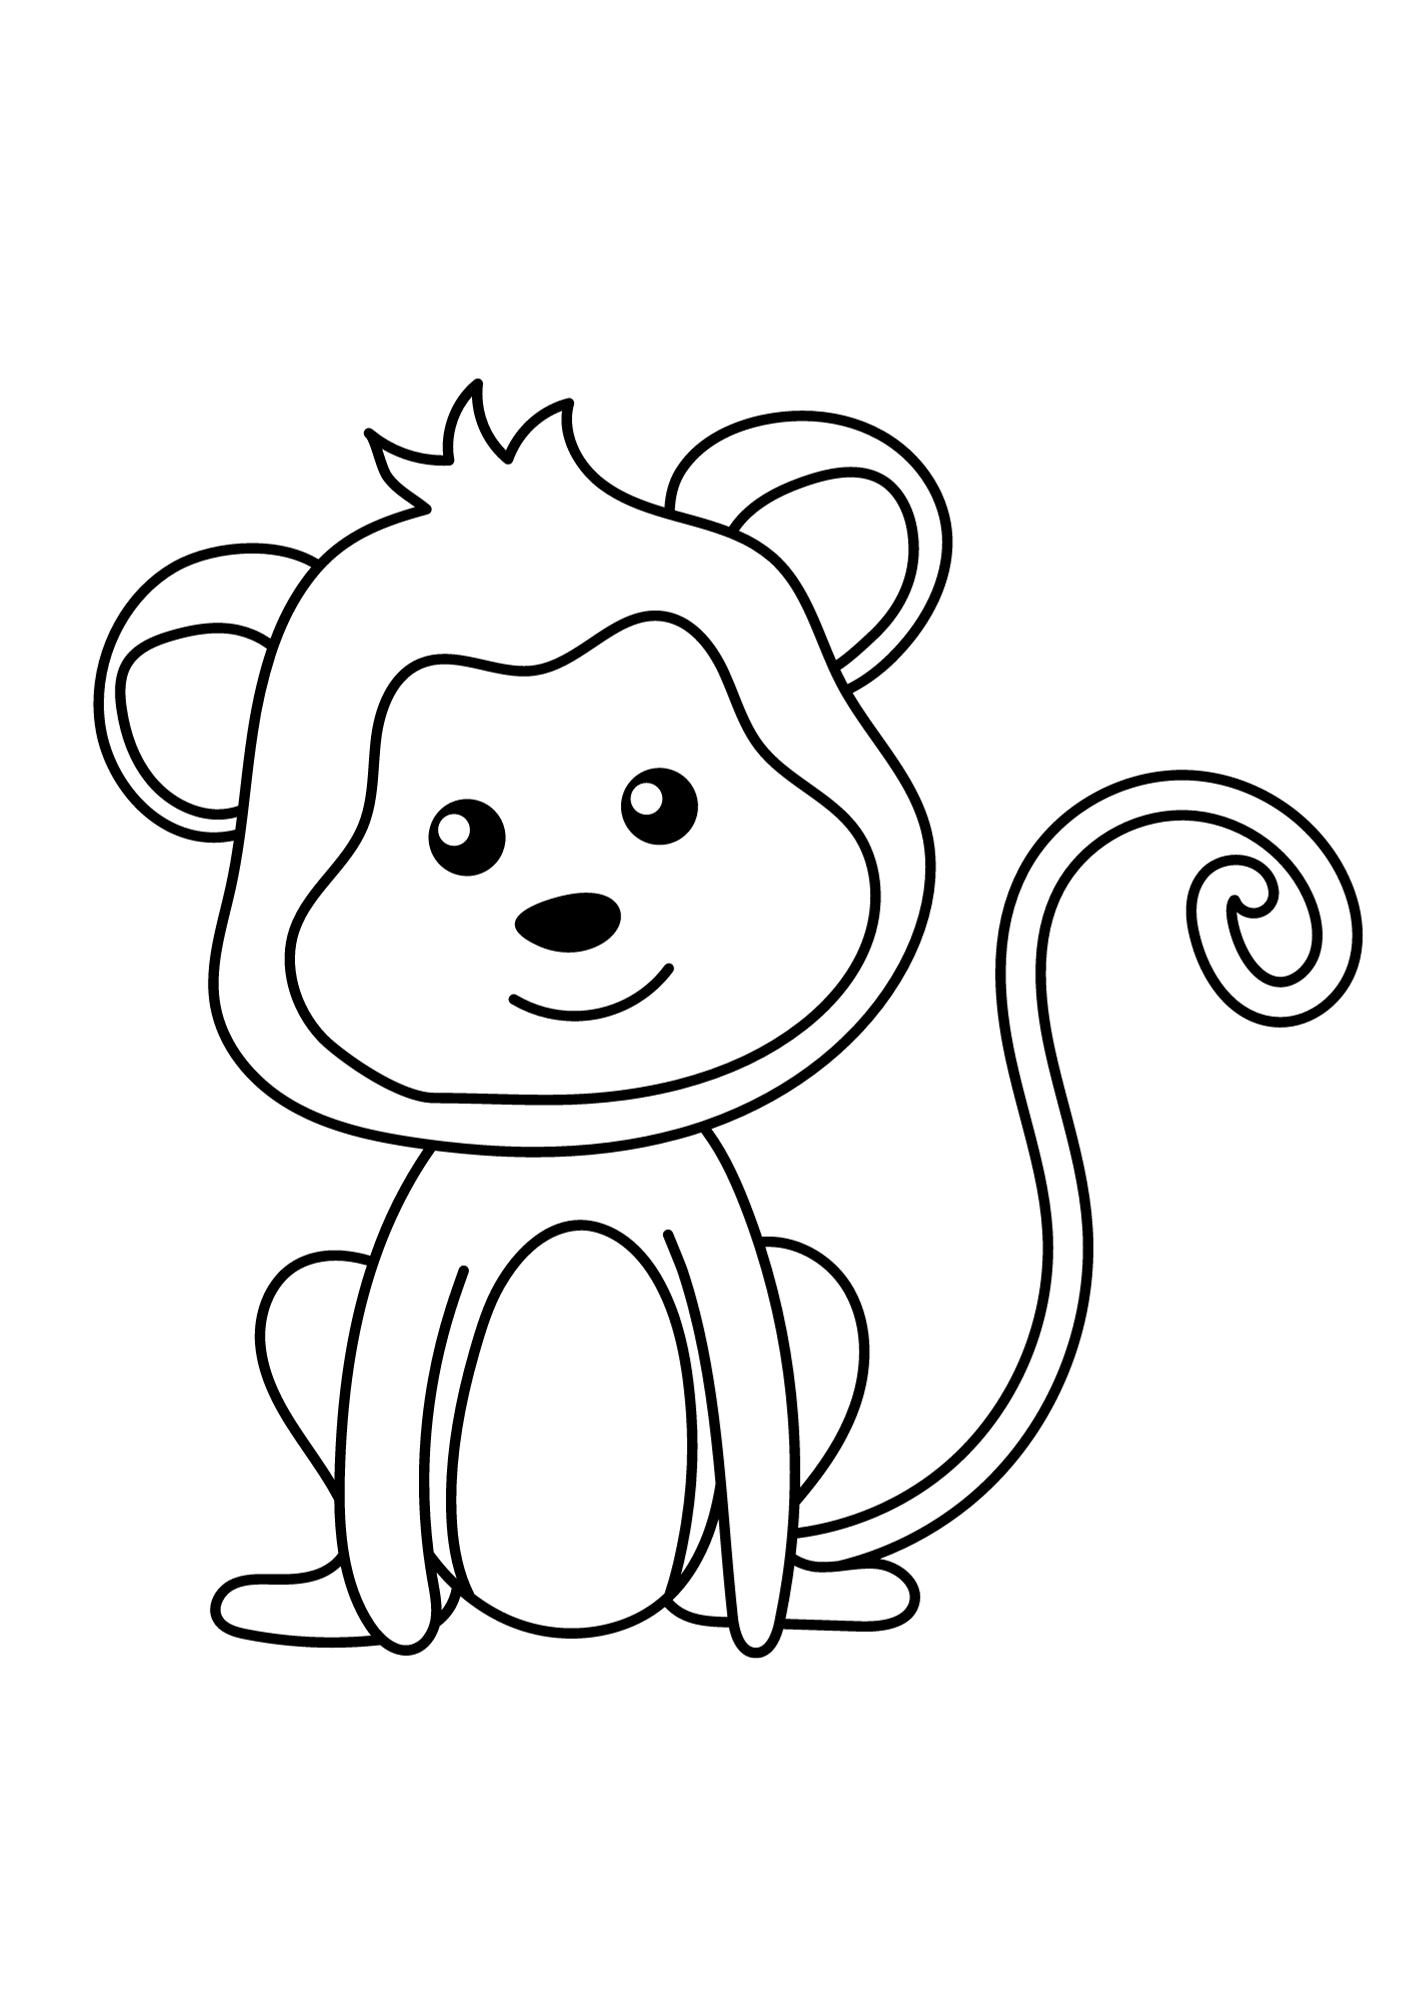 Free Monkey To Print Coloring Page